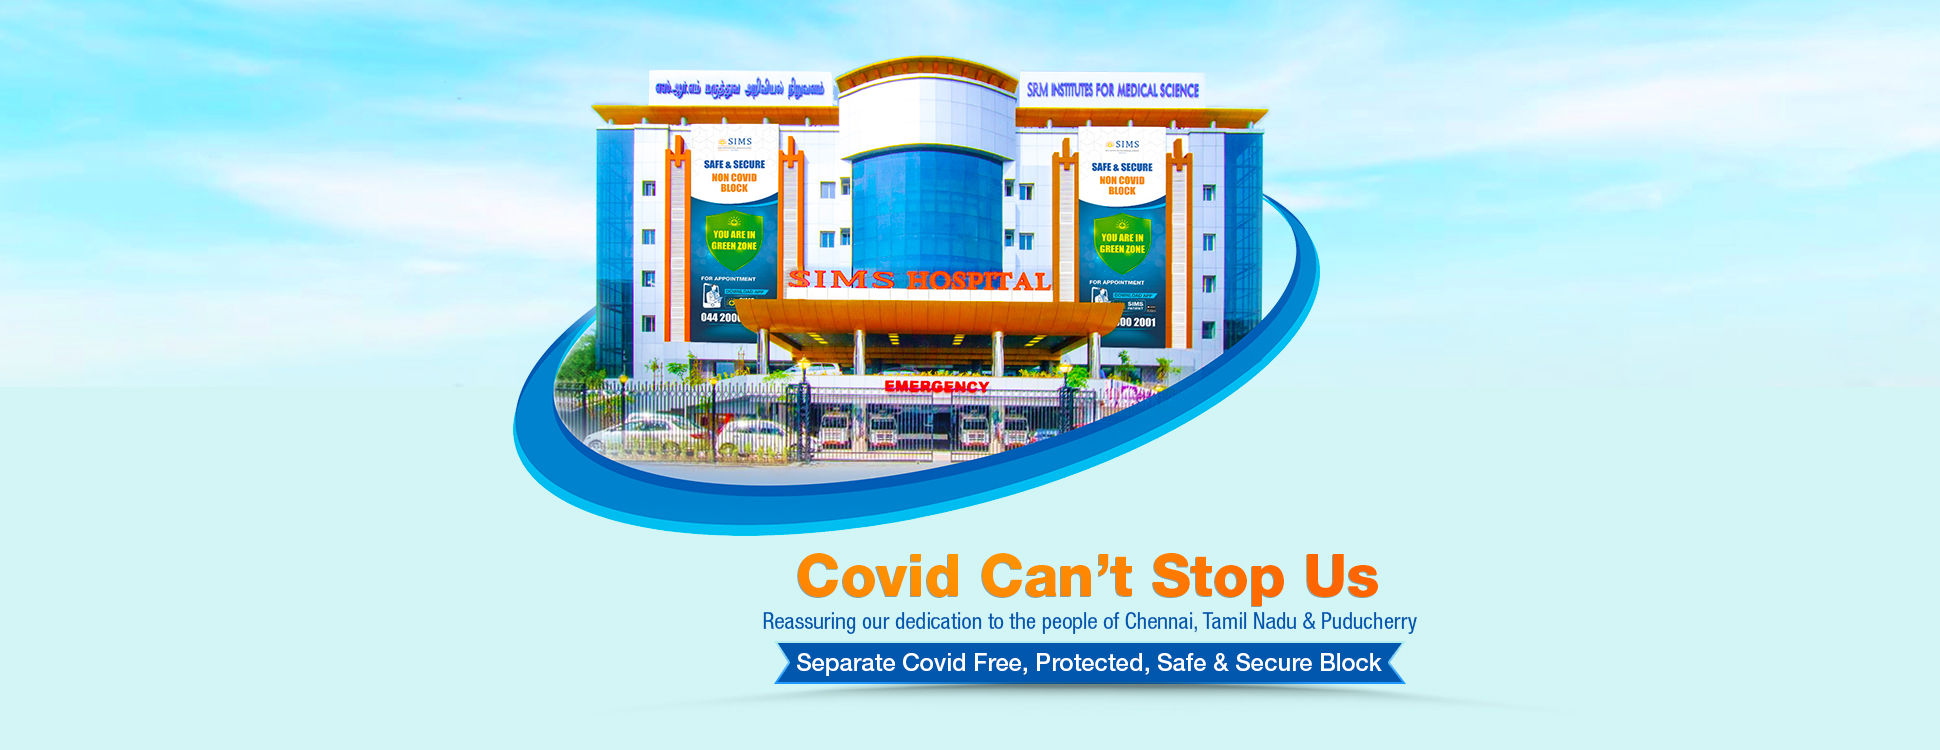 SIMS-is-Safe-Covid-Can’t-Stop-Us SIMS Hospital